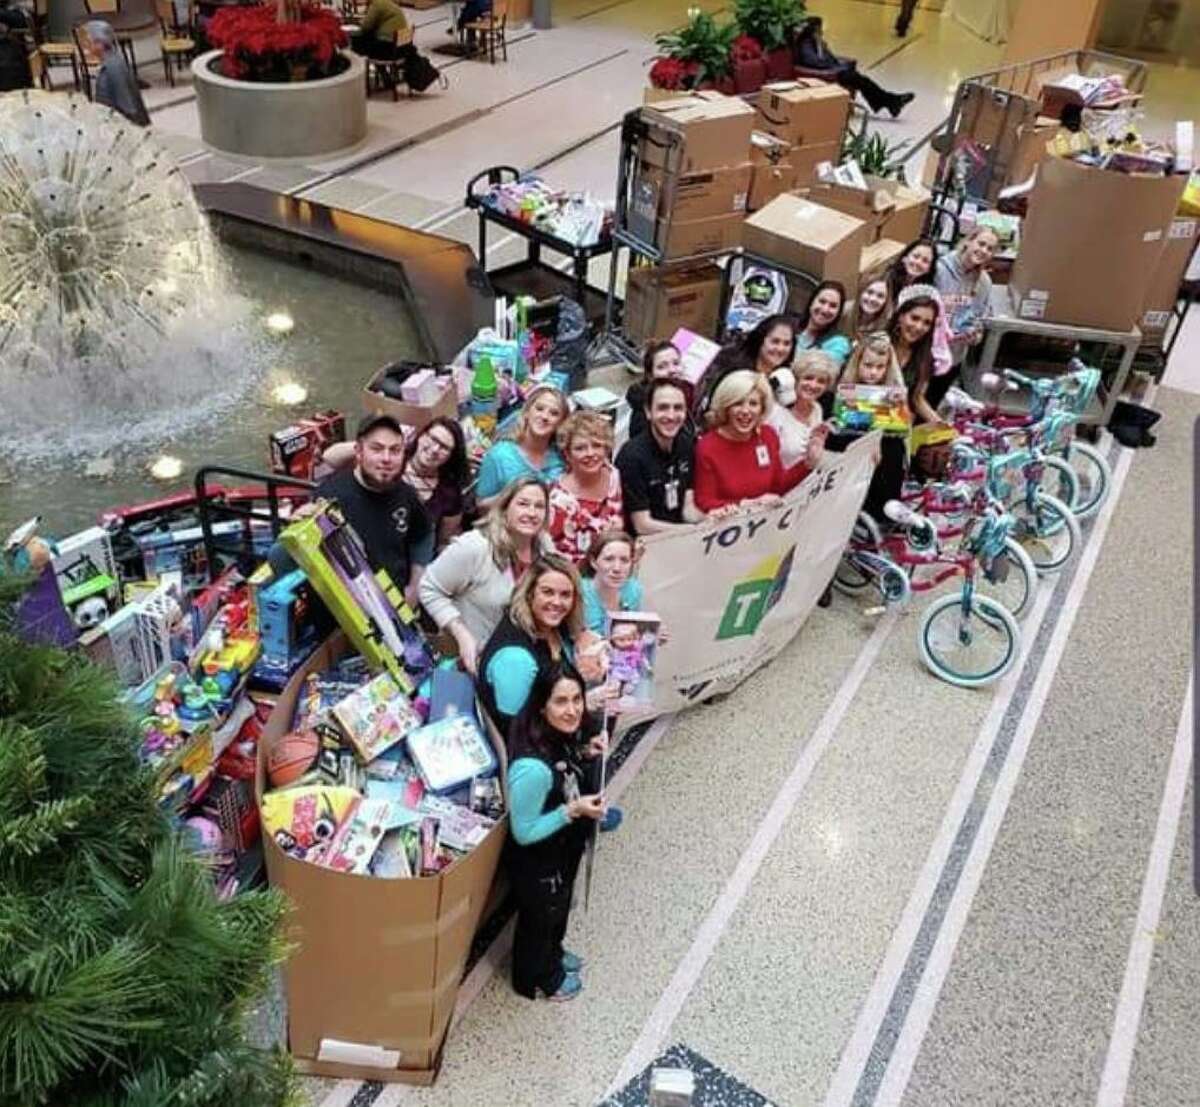 The delivery at Yale New Haven Hospital from Faith's Annual Toy Drive in 2019, when Faith and Lisa Tremblay collected over 2,300 toys in 2019, making them the largest single donor to the Toy Closet.